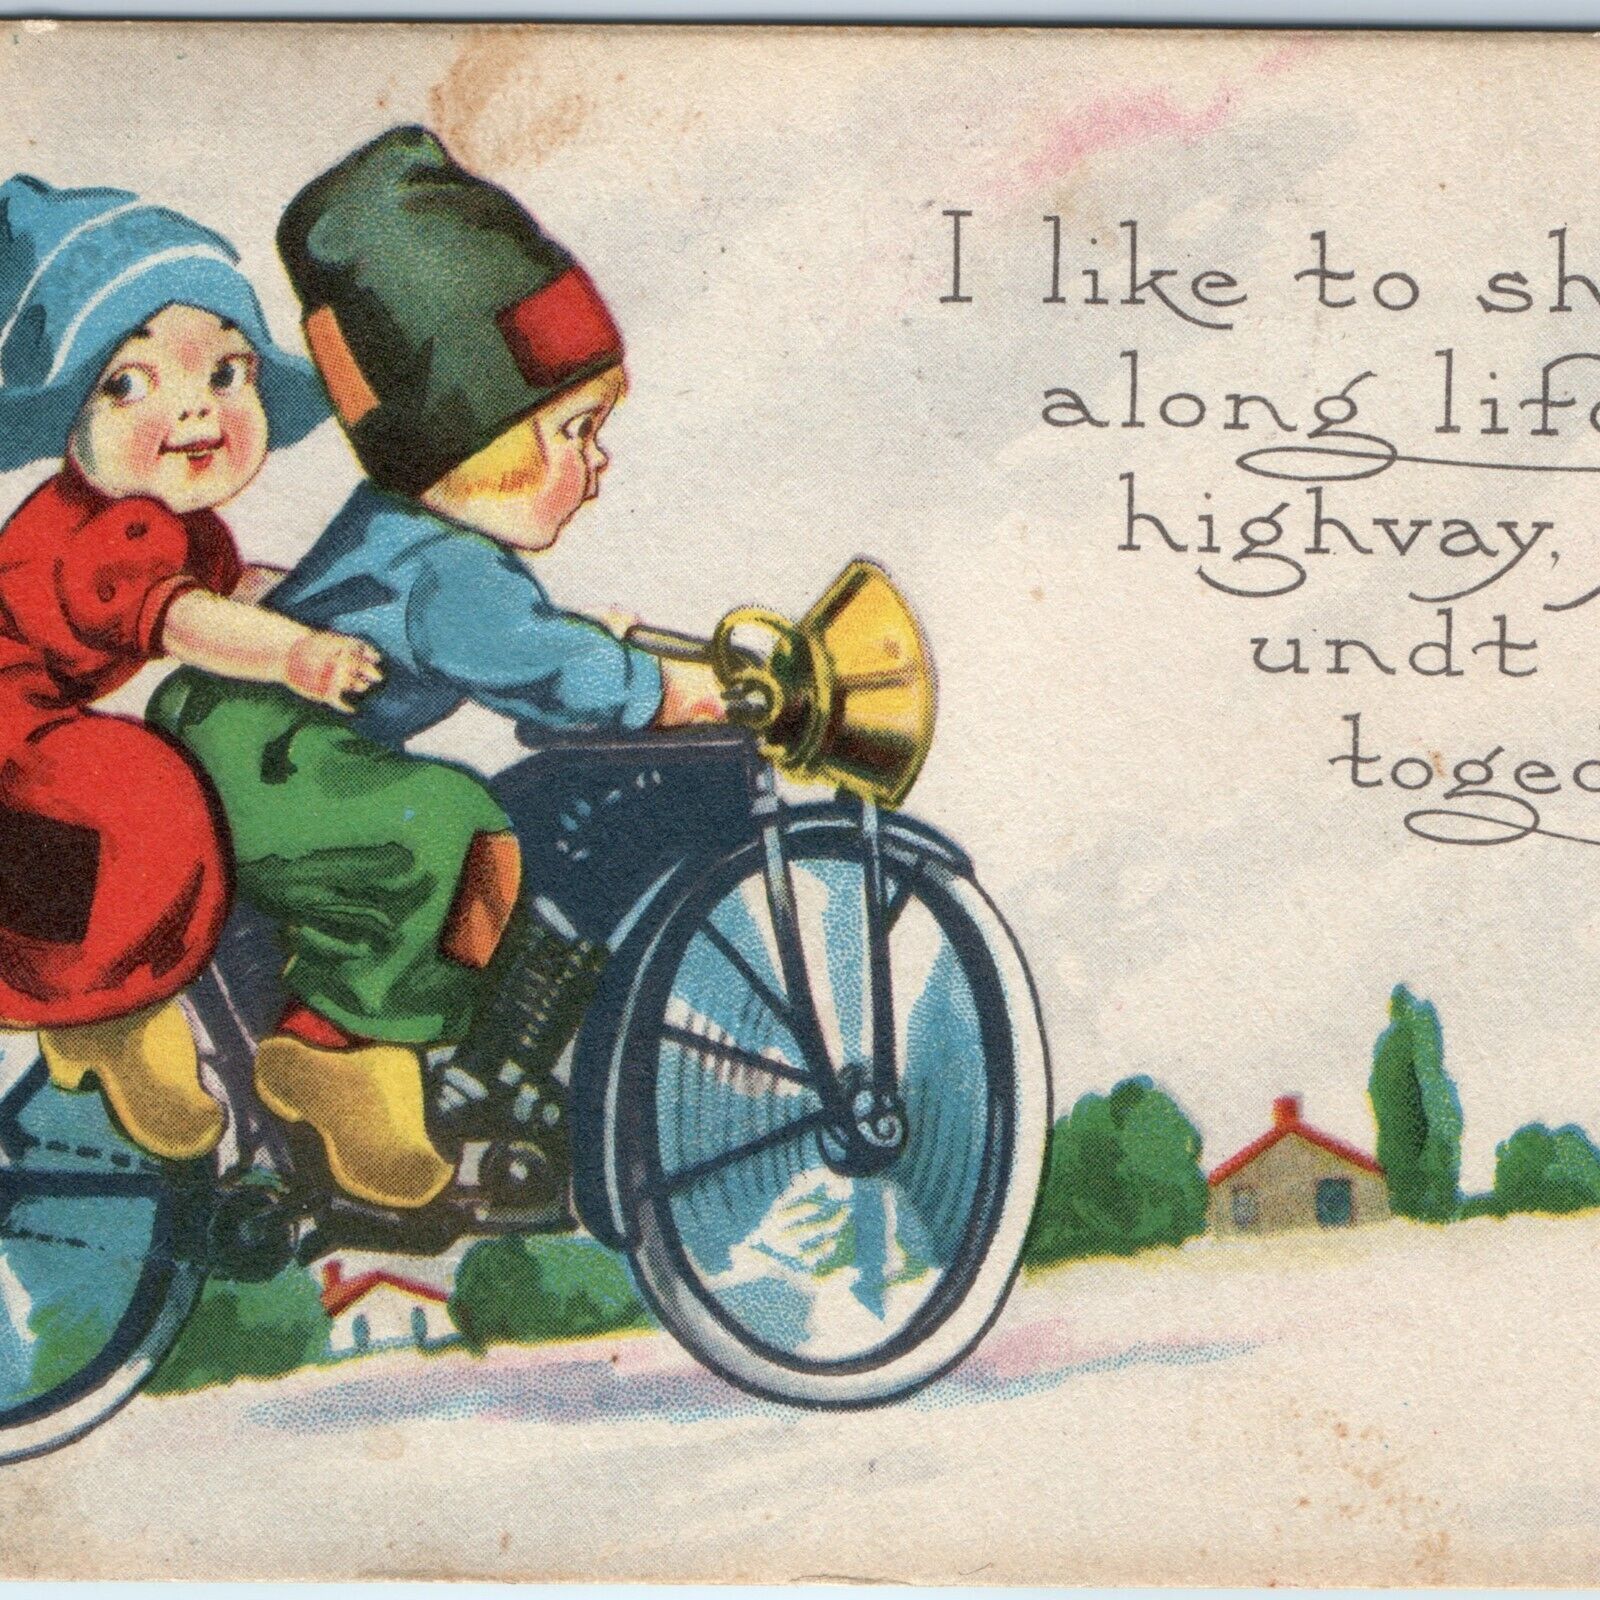 c1910s Lovely Dutch Children on Motorcycle Motor Bike Bicycle Postcard Cute A175